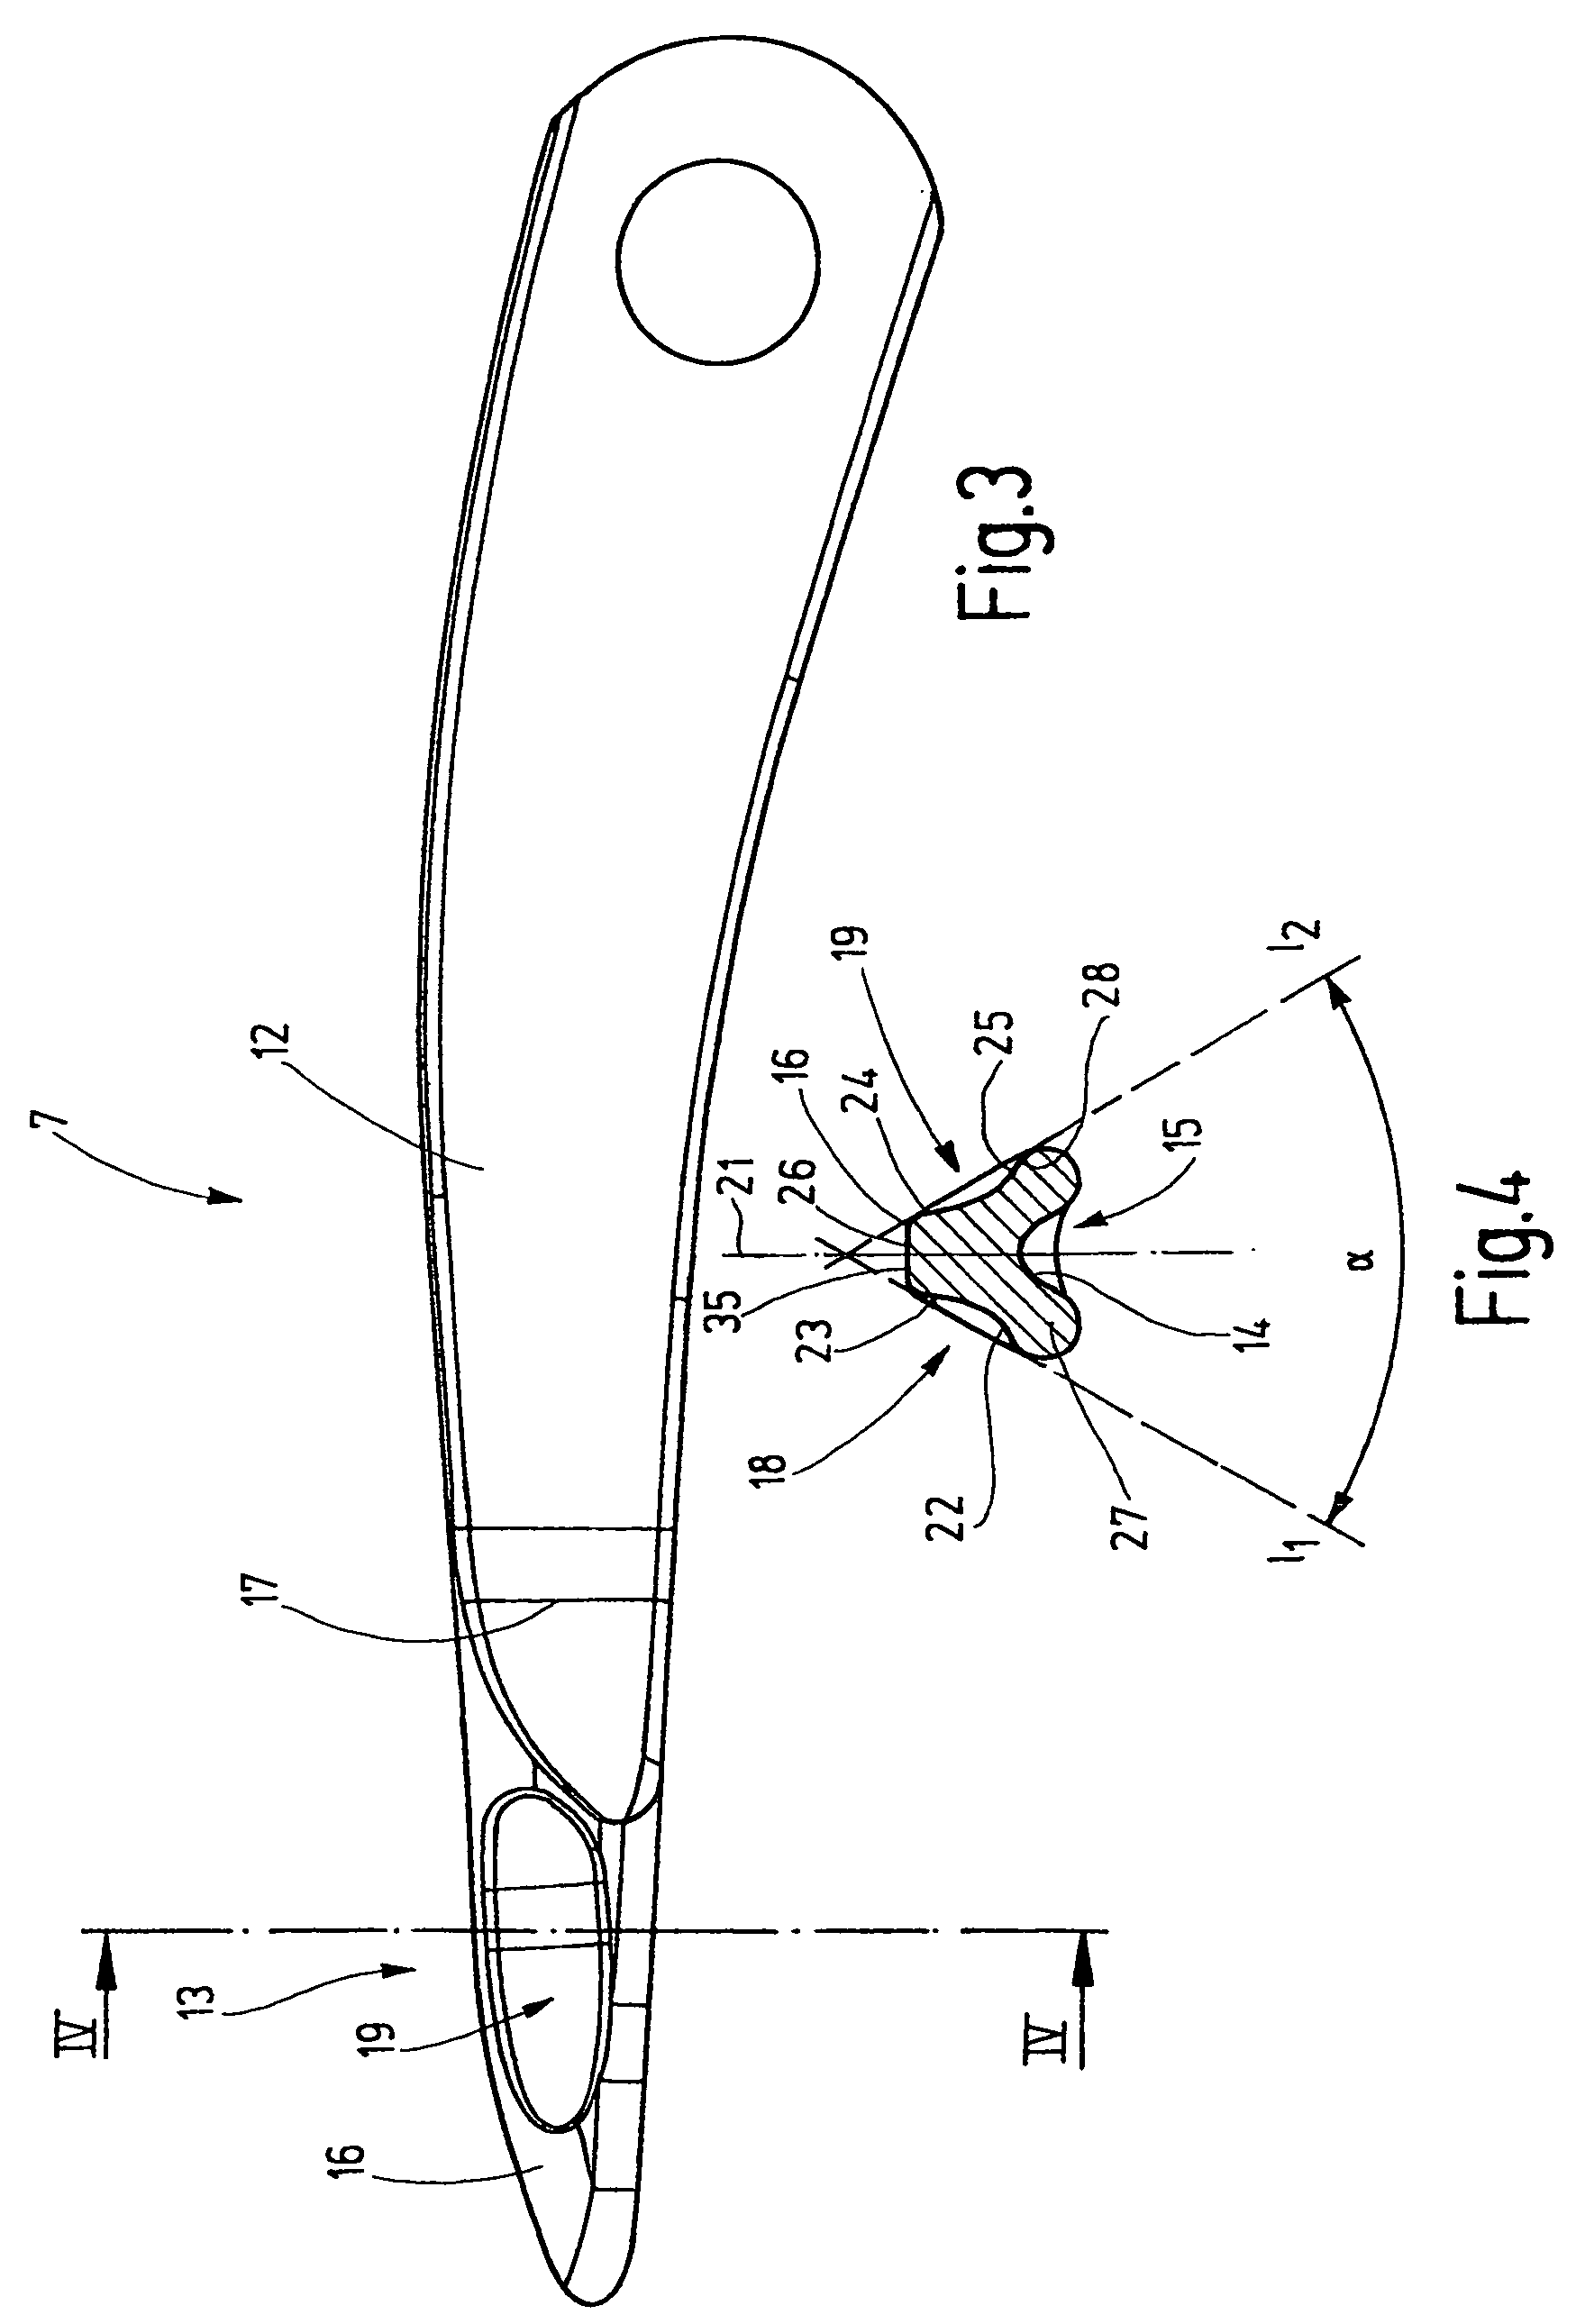 Latch needle for a loop-forming textile machine